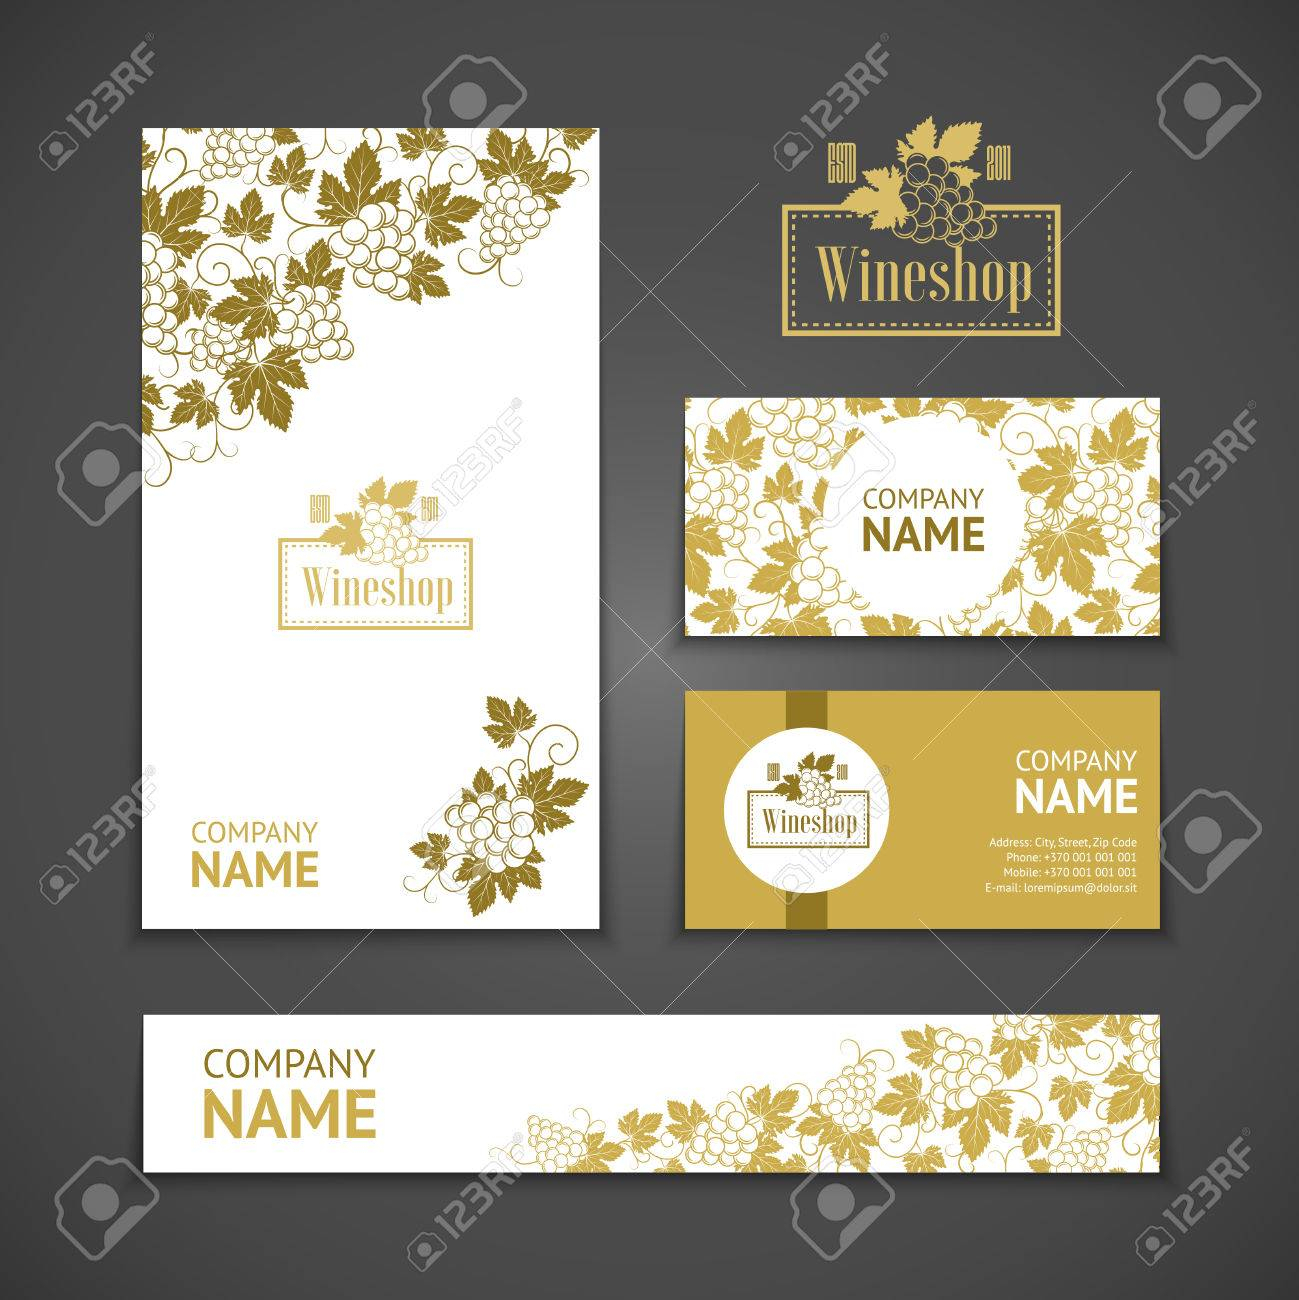 Set Of Business Cards. Templates For Wine Company Within Company Business Cards Templates